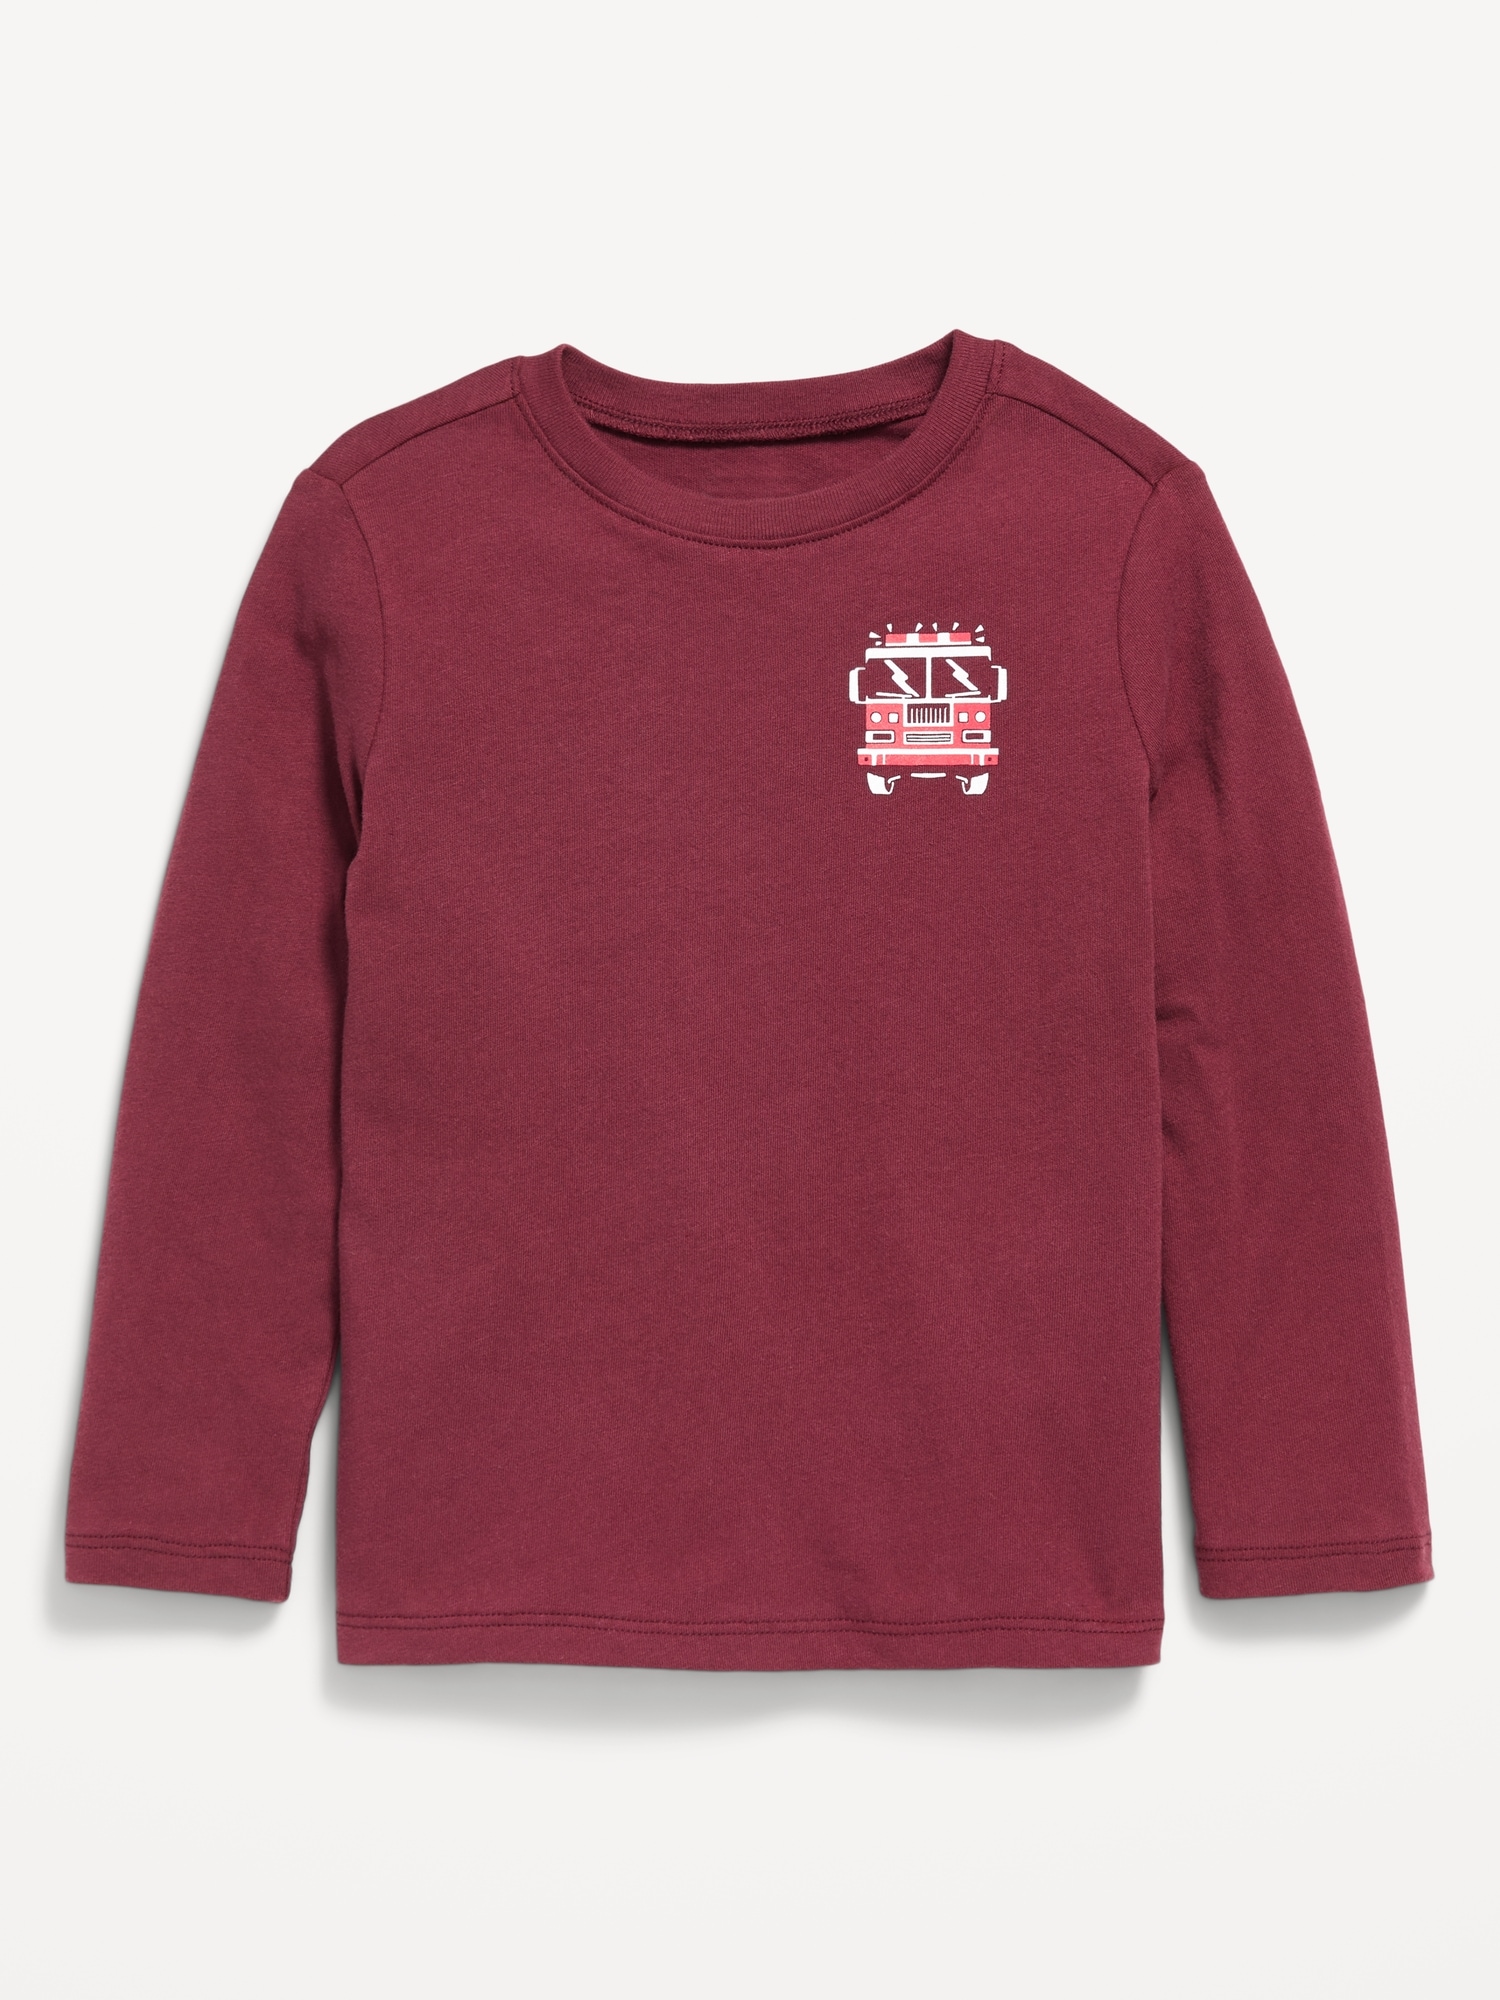 Long-Sleeve Graphic T-Shirt for Toddler Boys